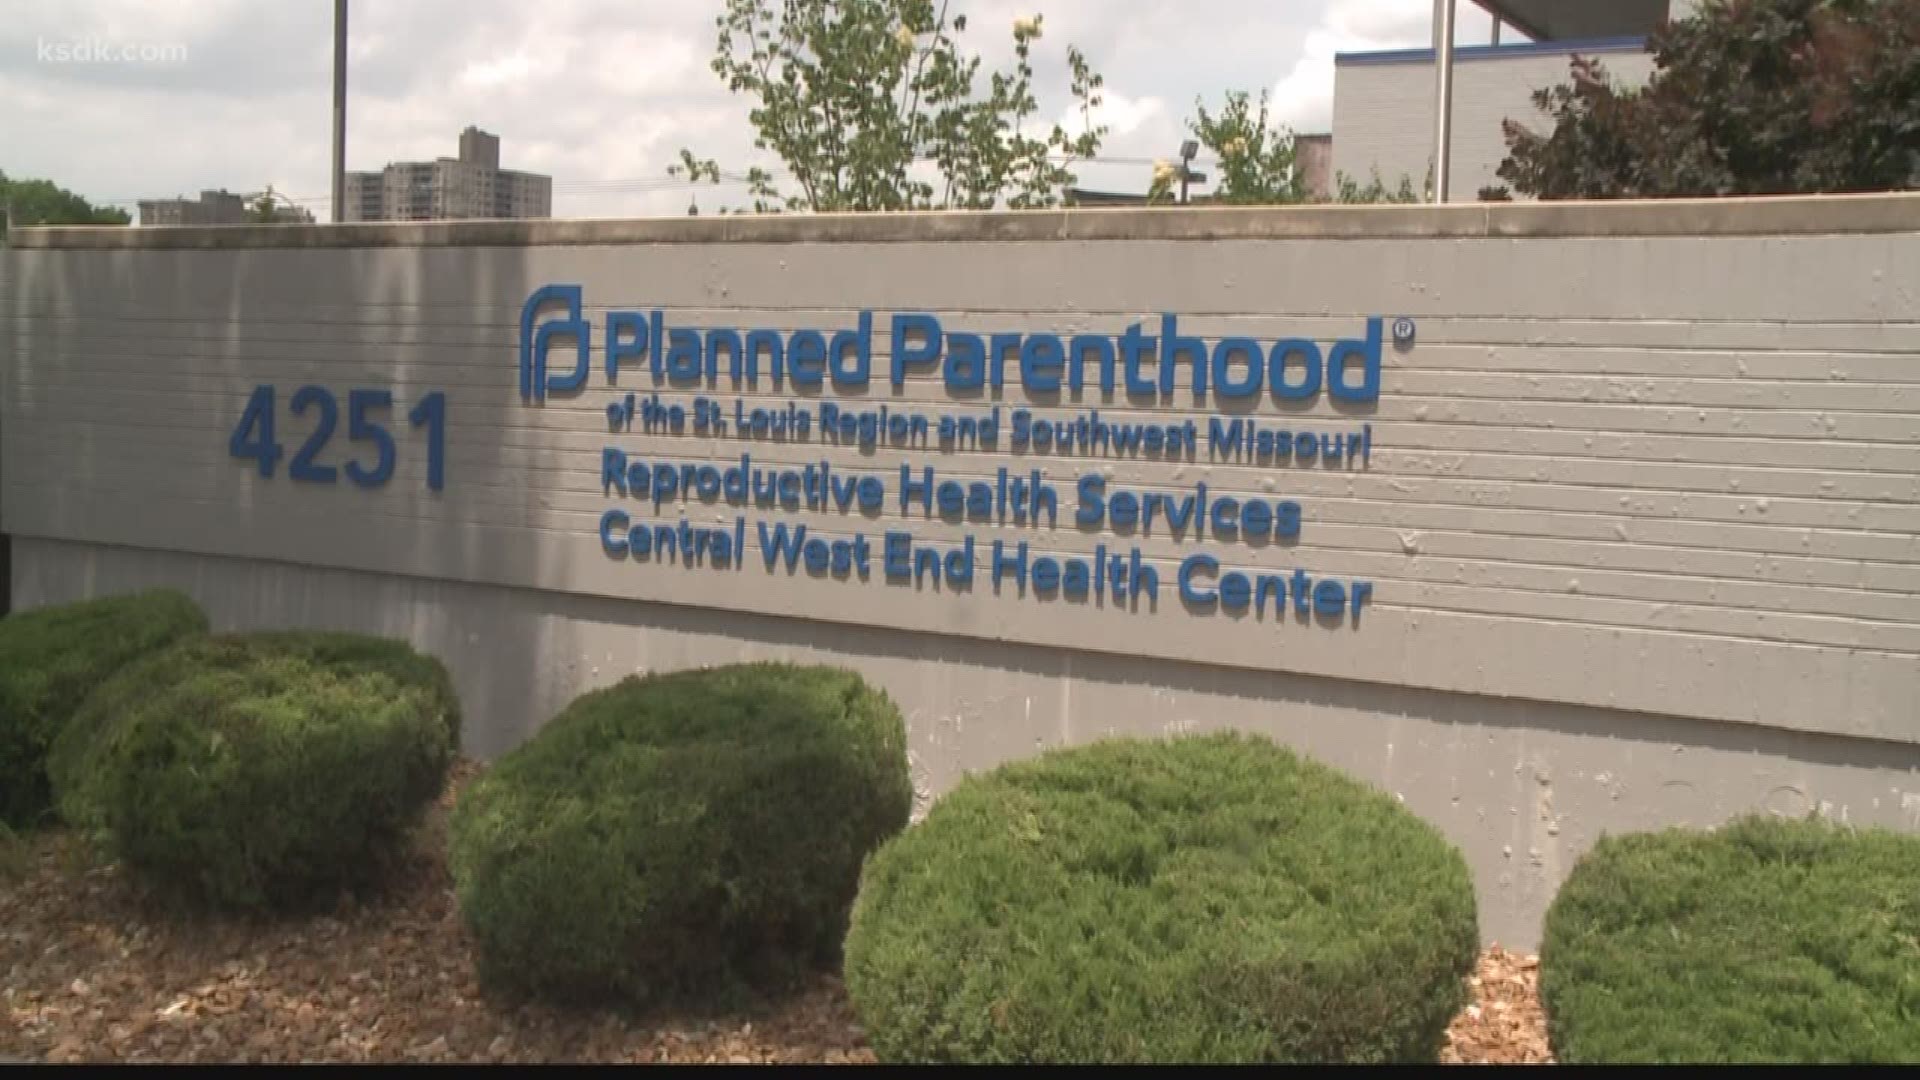 The Missouri Circuit court has ruled in favor of Planned Parenthood over their license to continue performing abortions in St. Louis.